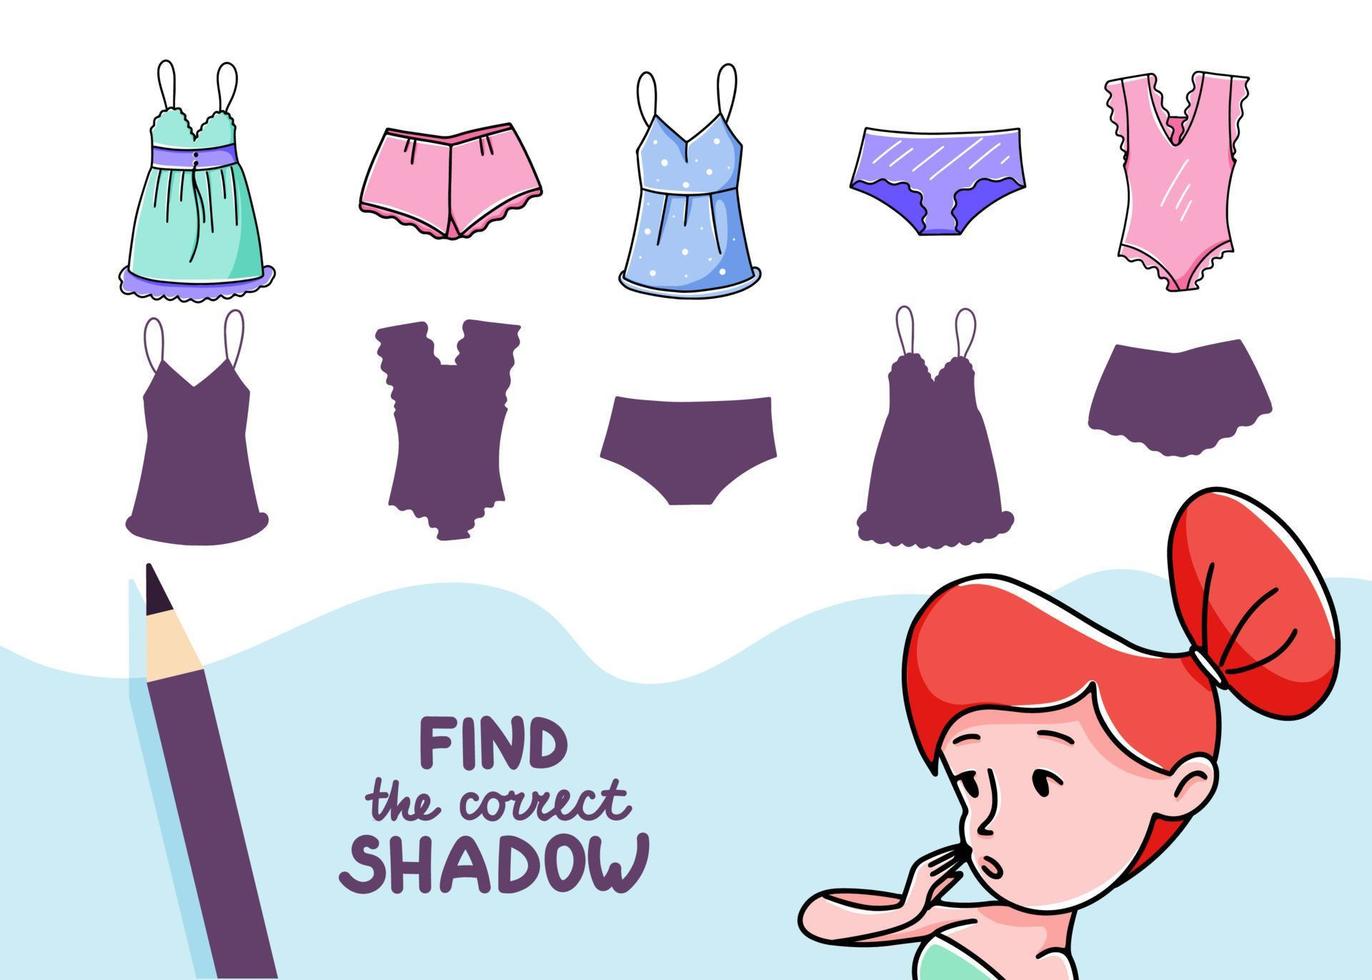 Find the correct shadow. Cute girl's underwear. Educational game for kids. Collection of children's games. Vector illustration in cartoon style